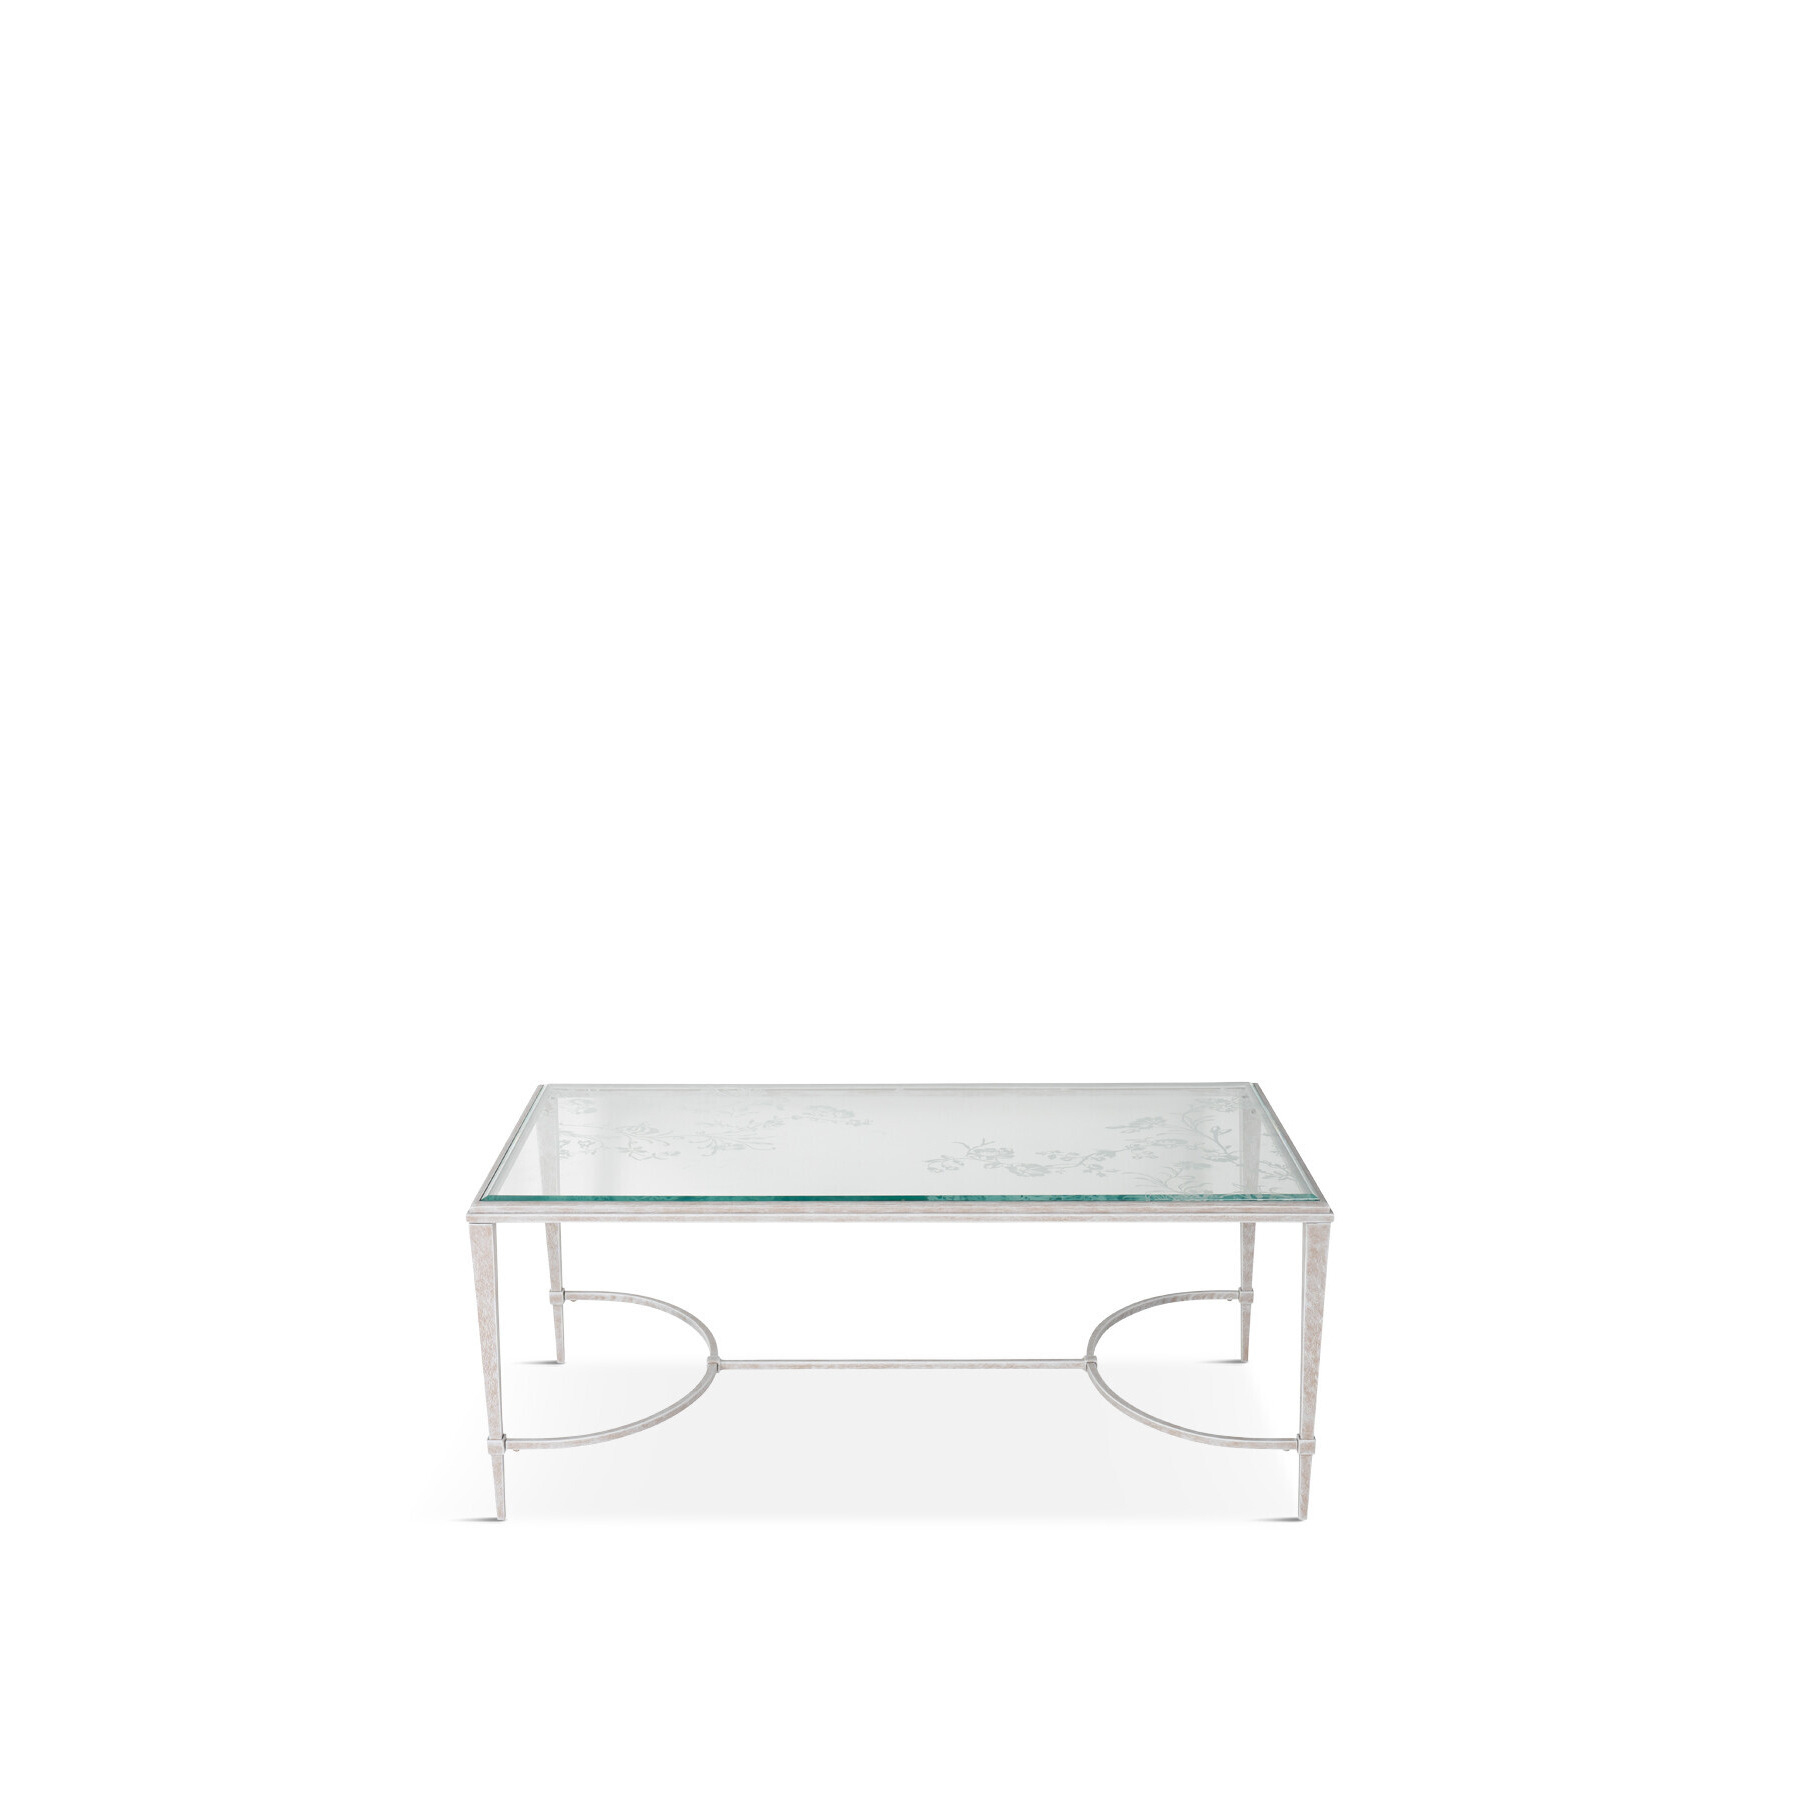 Laura Ashley Aria Etched Glass Distressed White Iron Coffee Table - Size 60x110x43 Multi - image 1